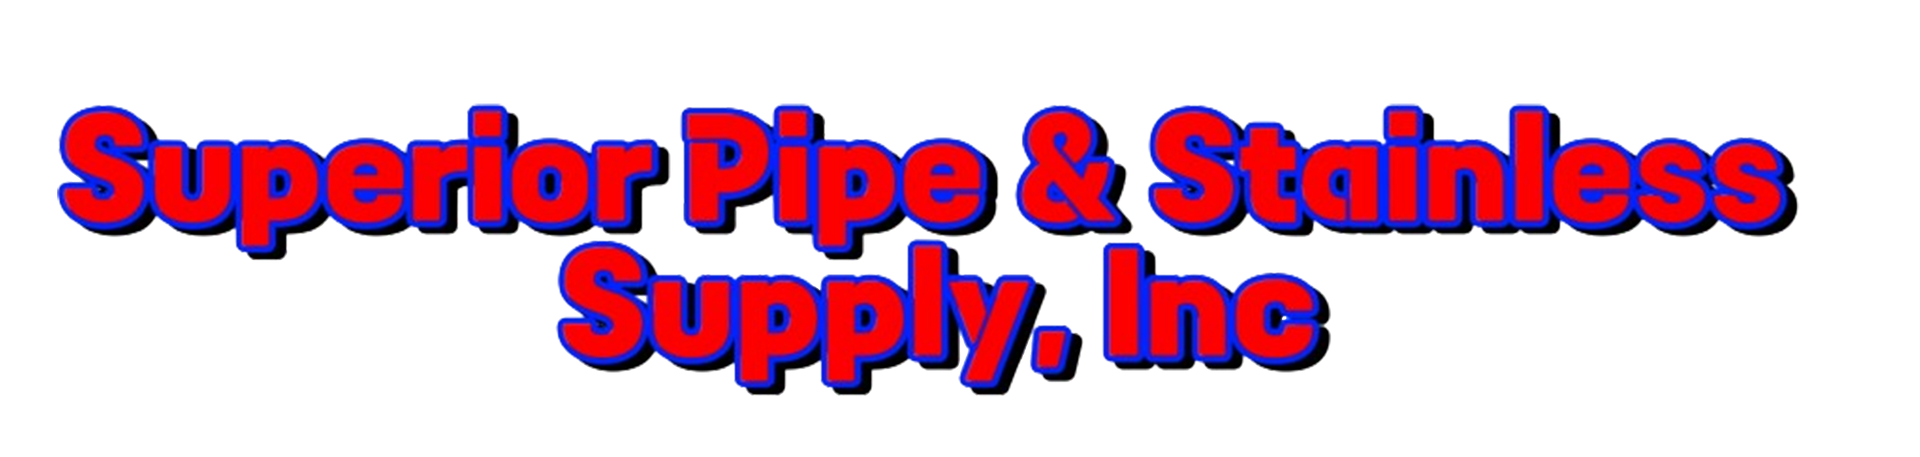 Superior Pipe & Stainless Supply, INC - Logo